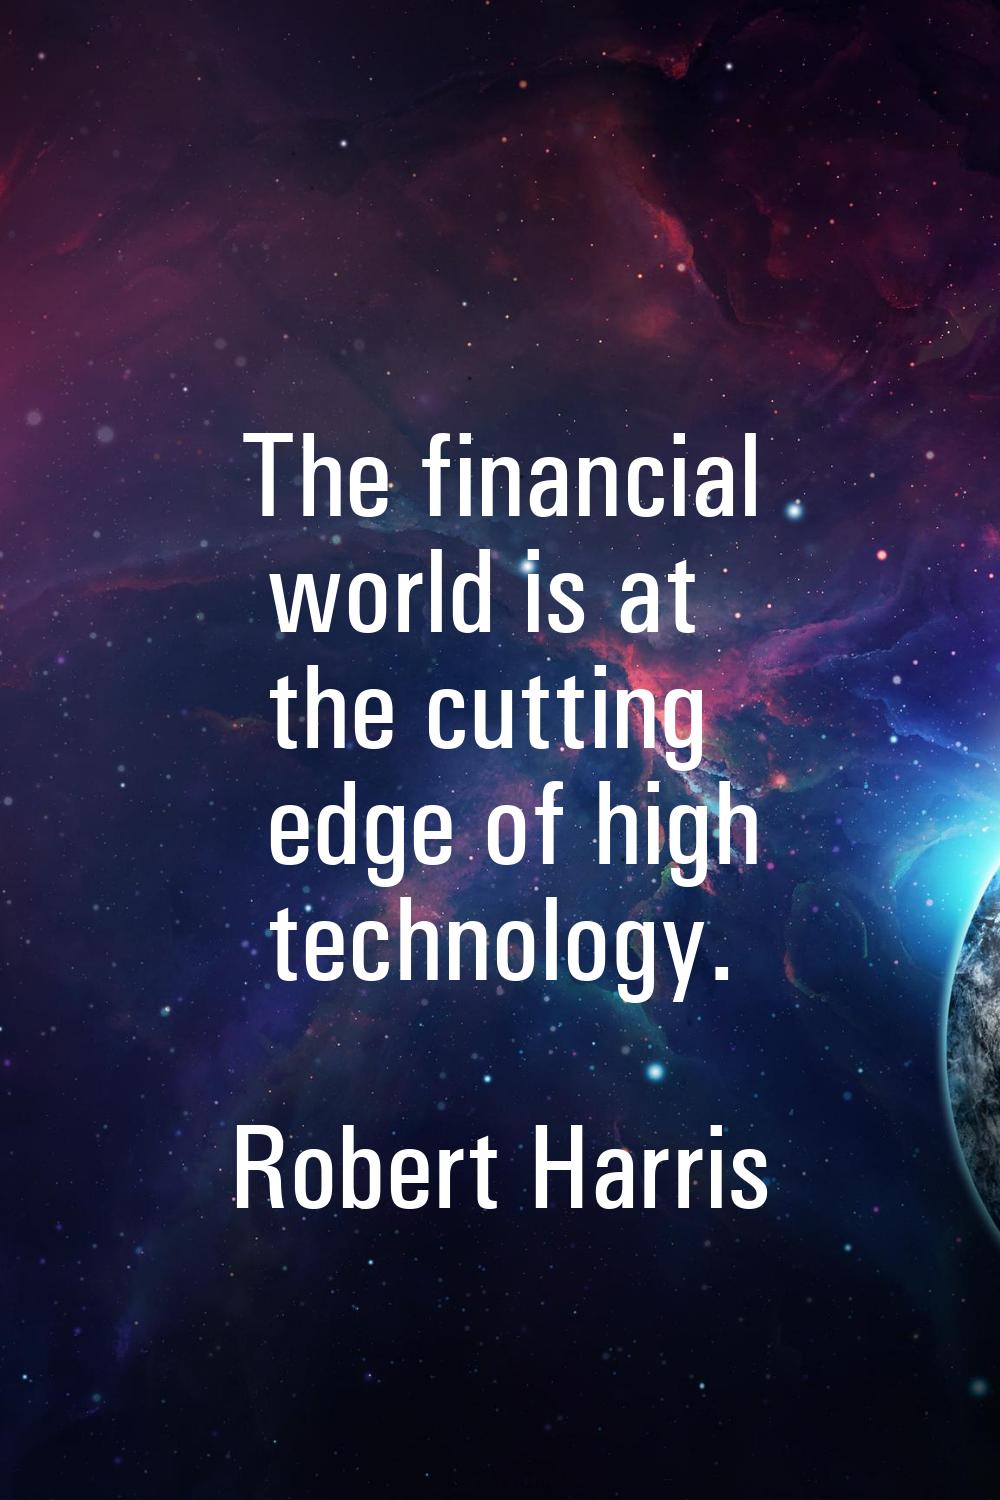 The financial world is at the cutting edge of high technology.